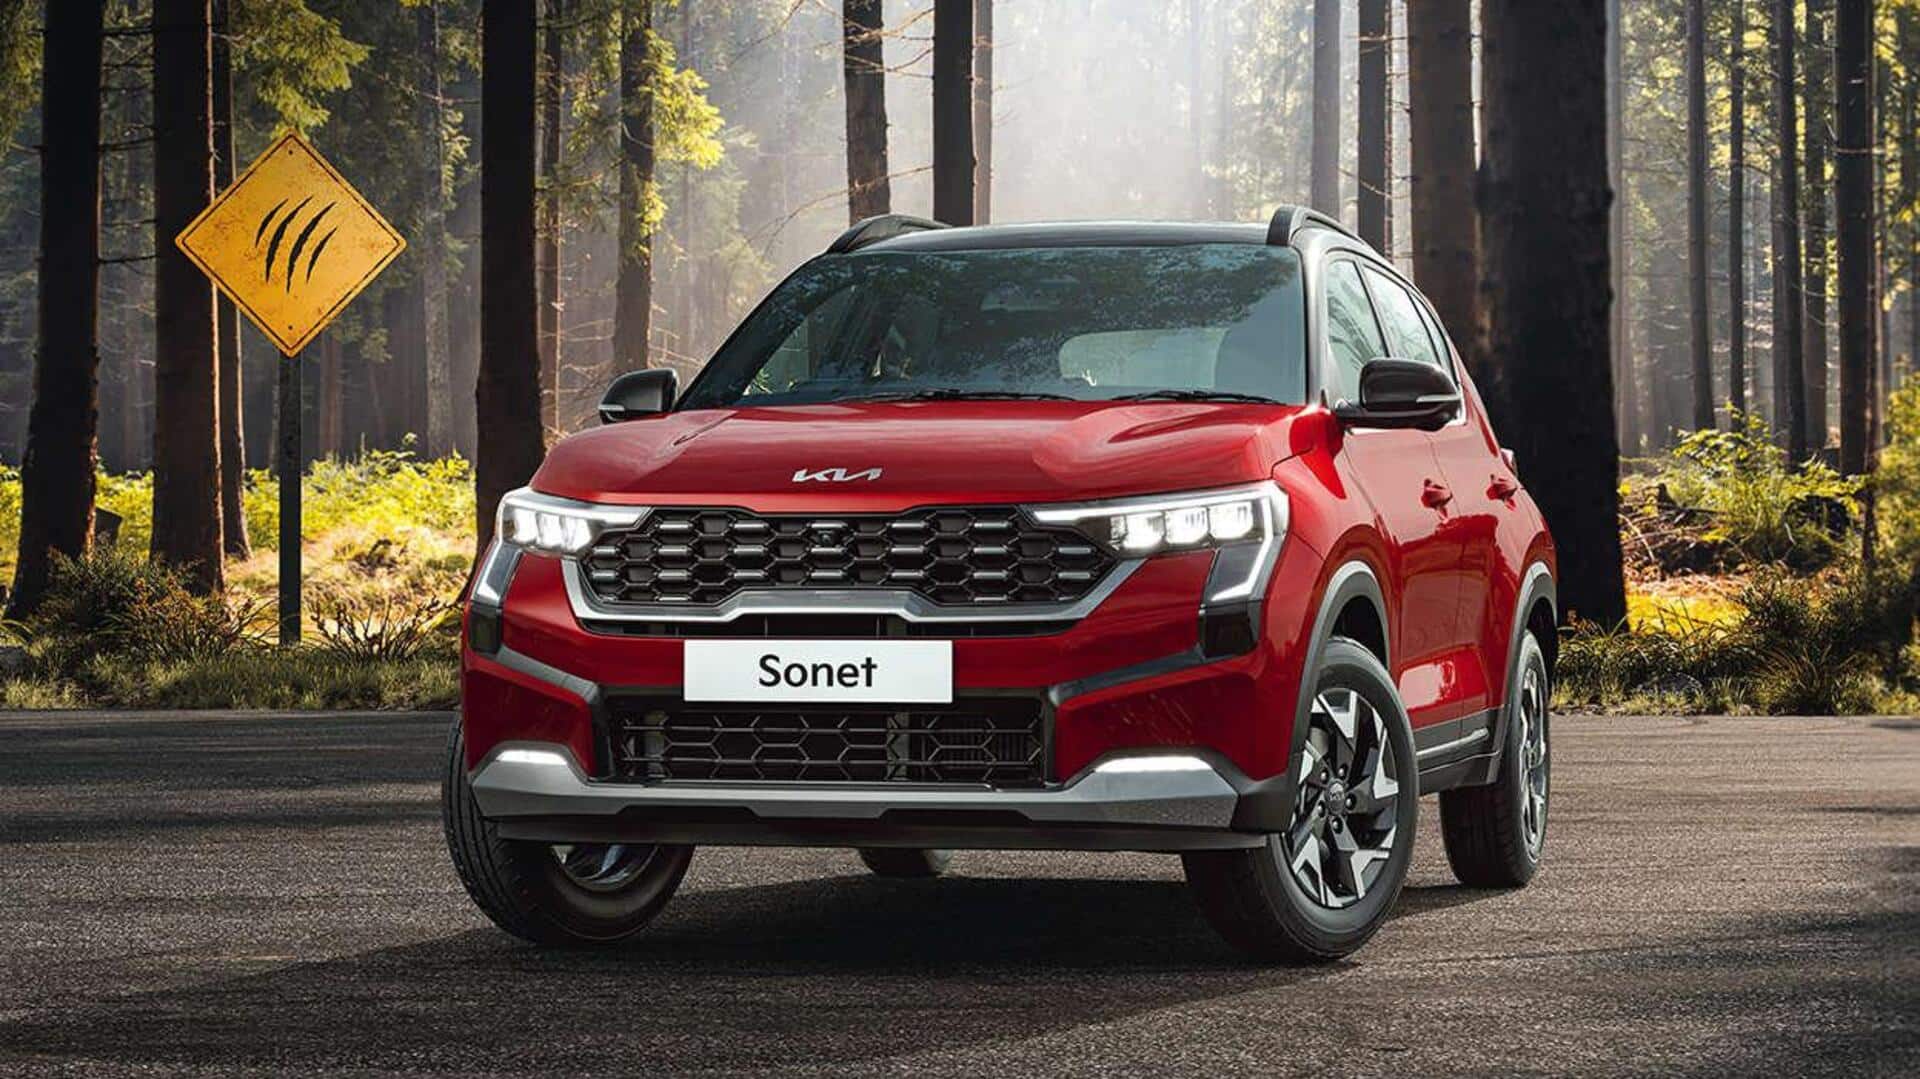 Upcoming ICE compact SUVs in India: Check list